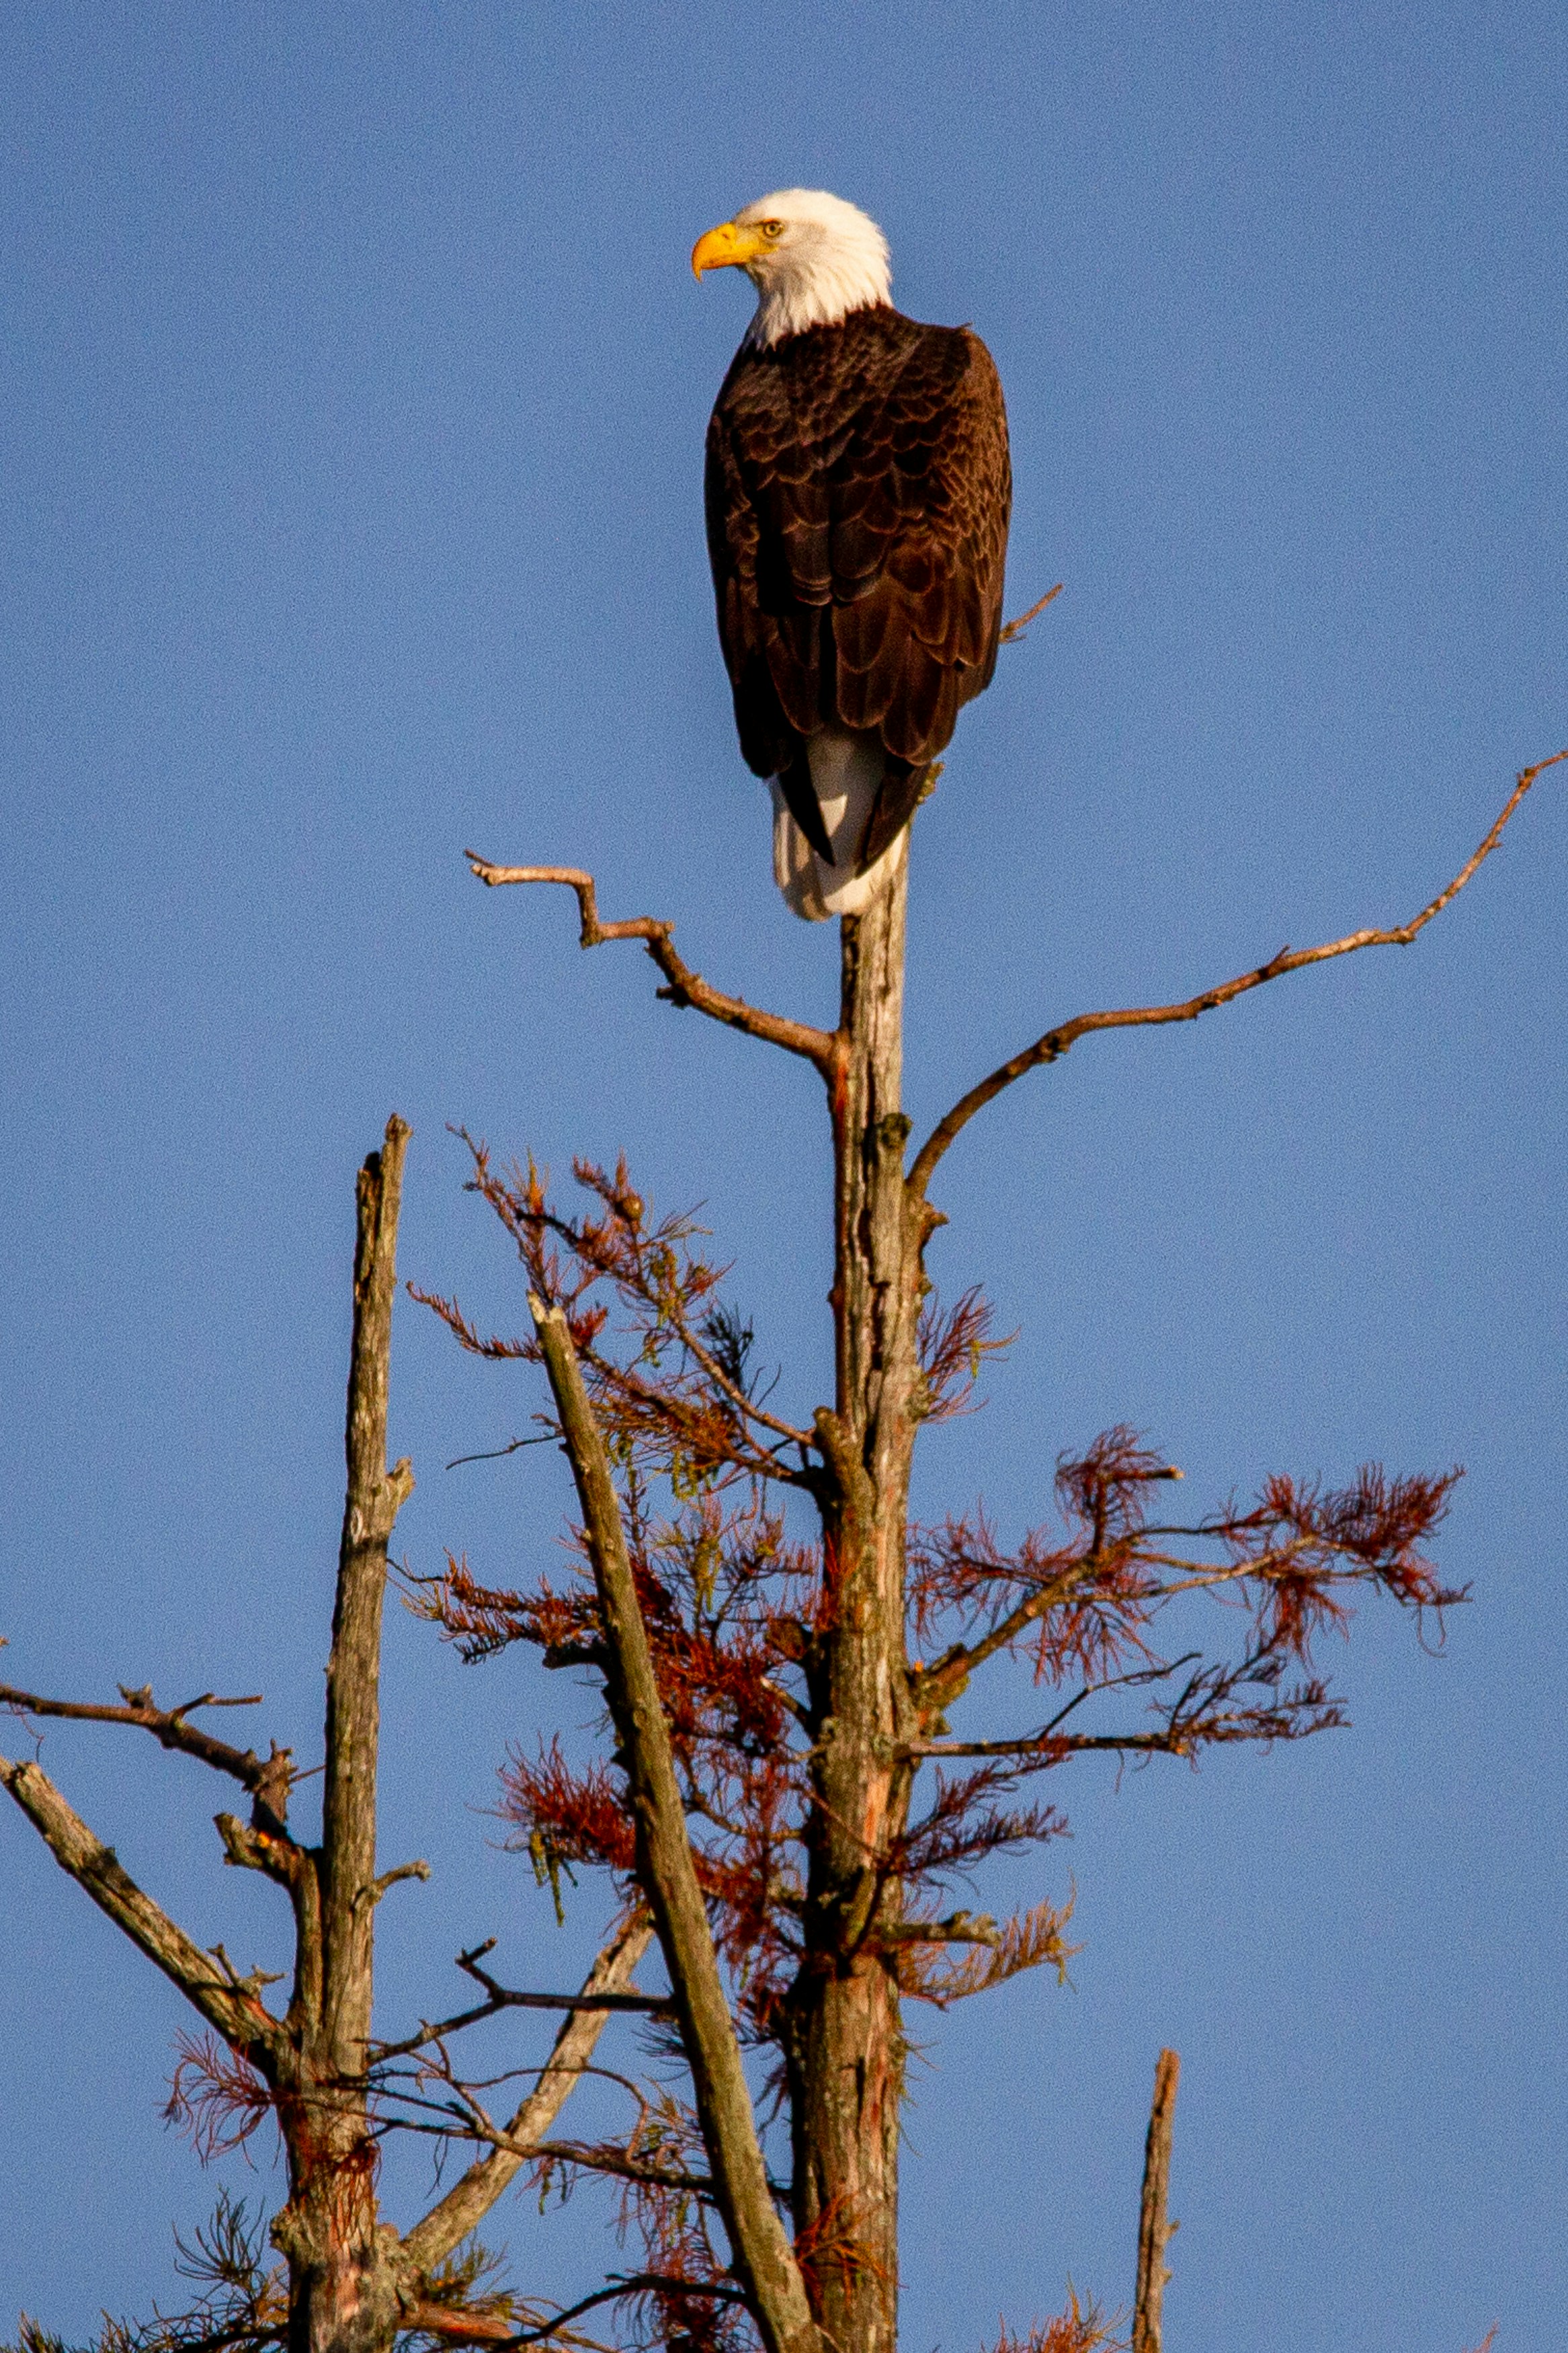 A bald eagle perched at the top of a cypress tree.